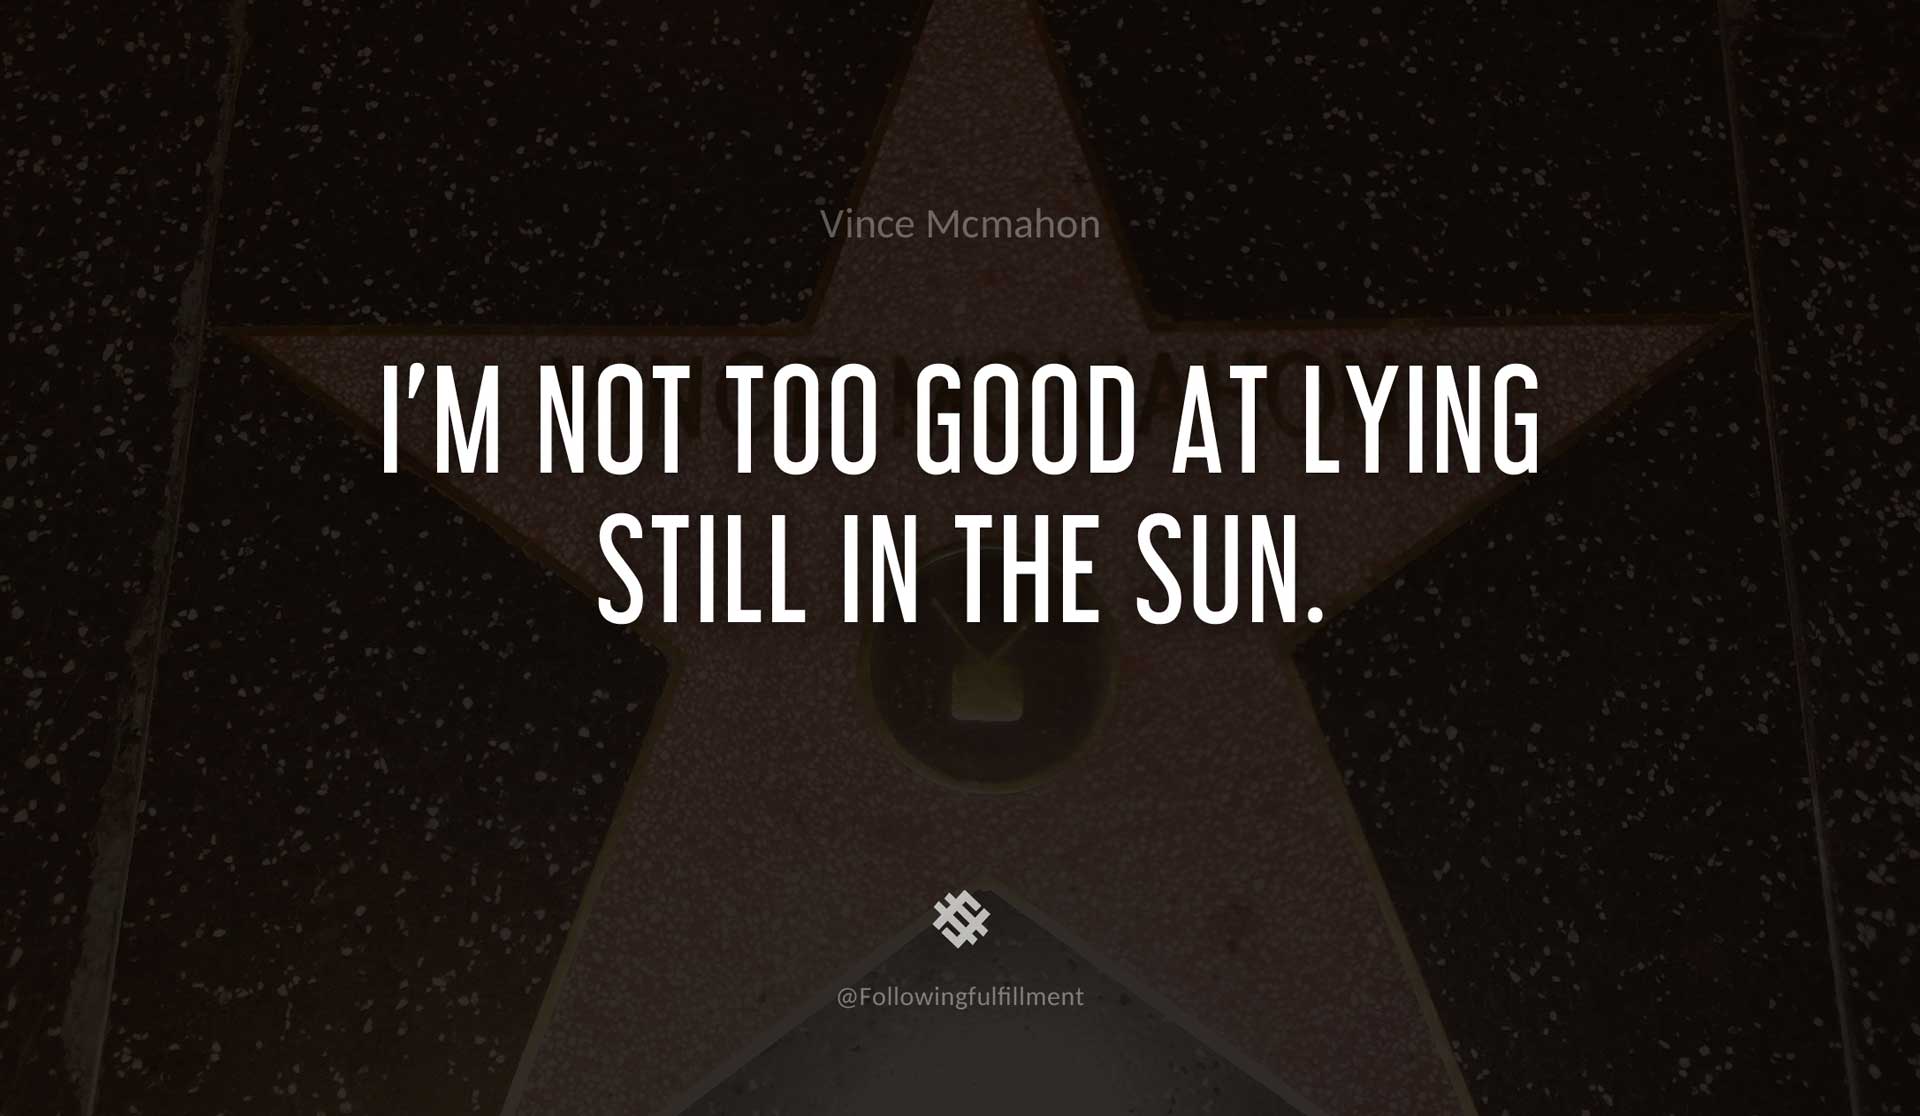 I'm-not-too-good-at-lying-still-in-the-sun.-VINCE-MCMAHON-Quote.jpg